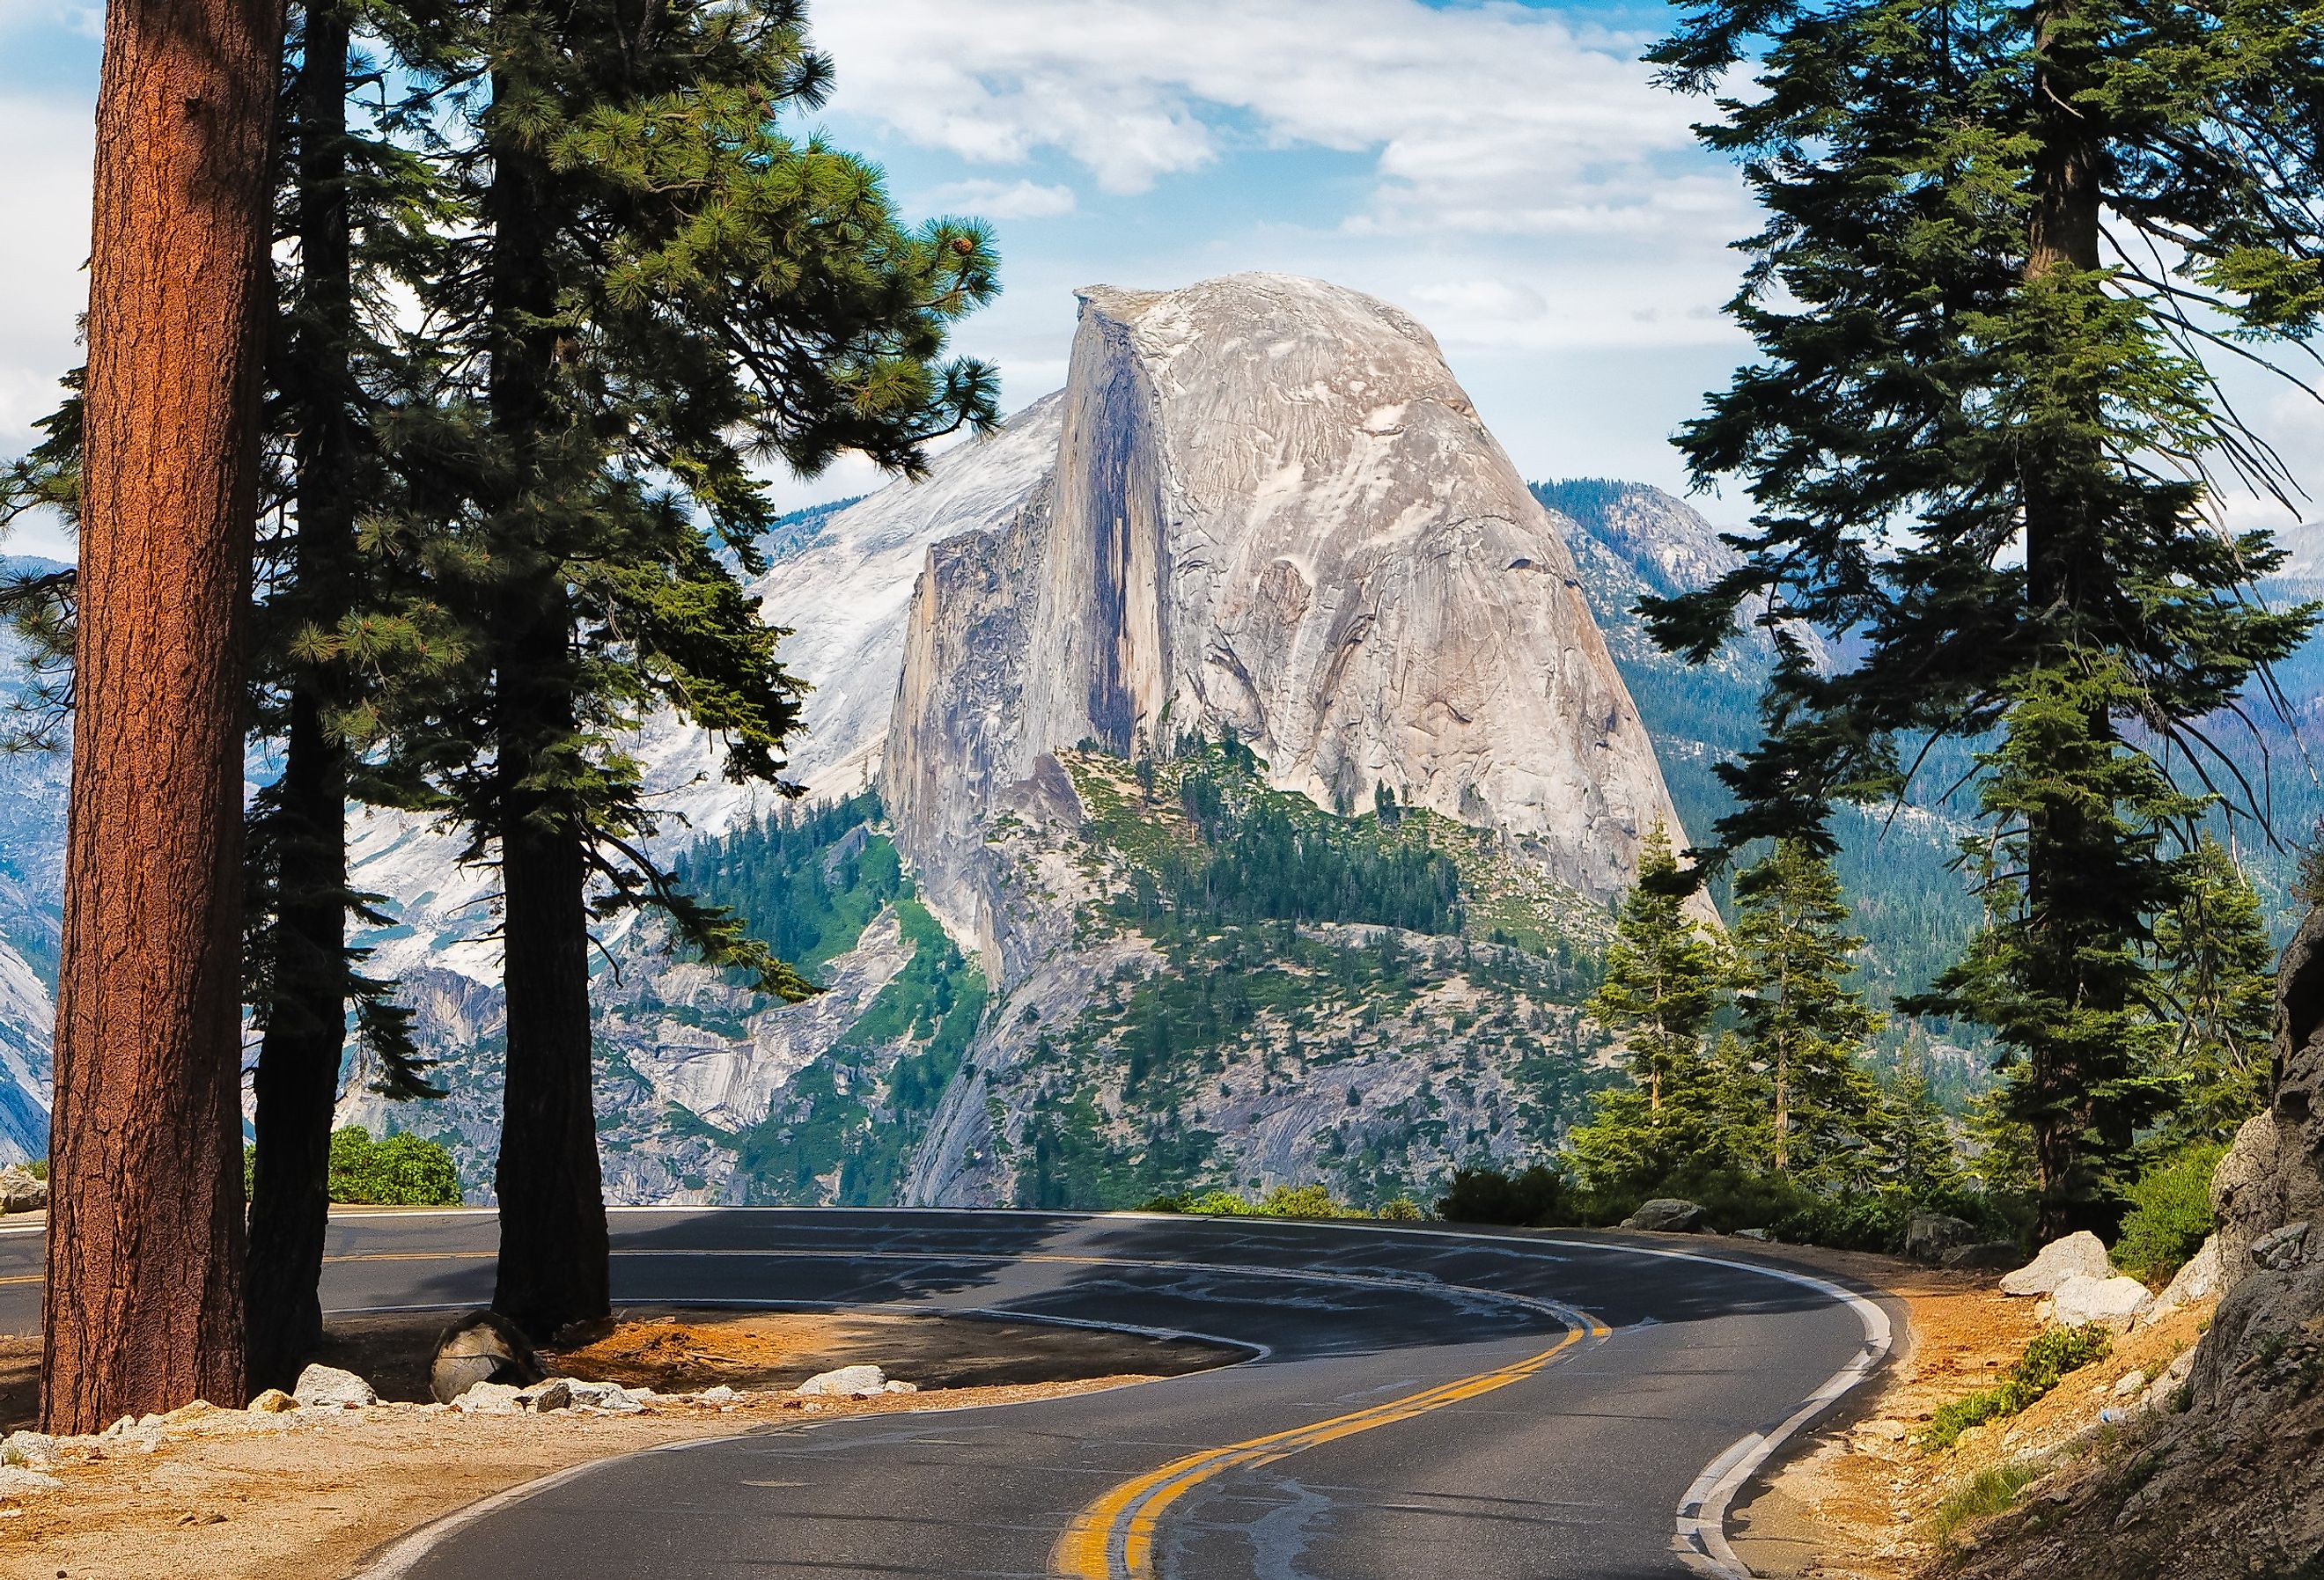 The road leading to Glacier Point in Yosemite National Park, California, USA with the Half Dome in the background. Image credit Tom Nevesely via AdobeStock.